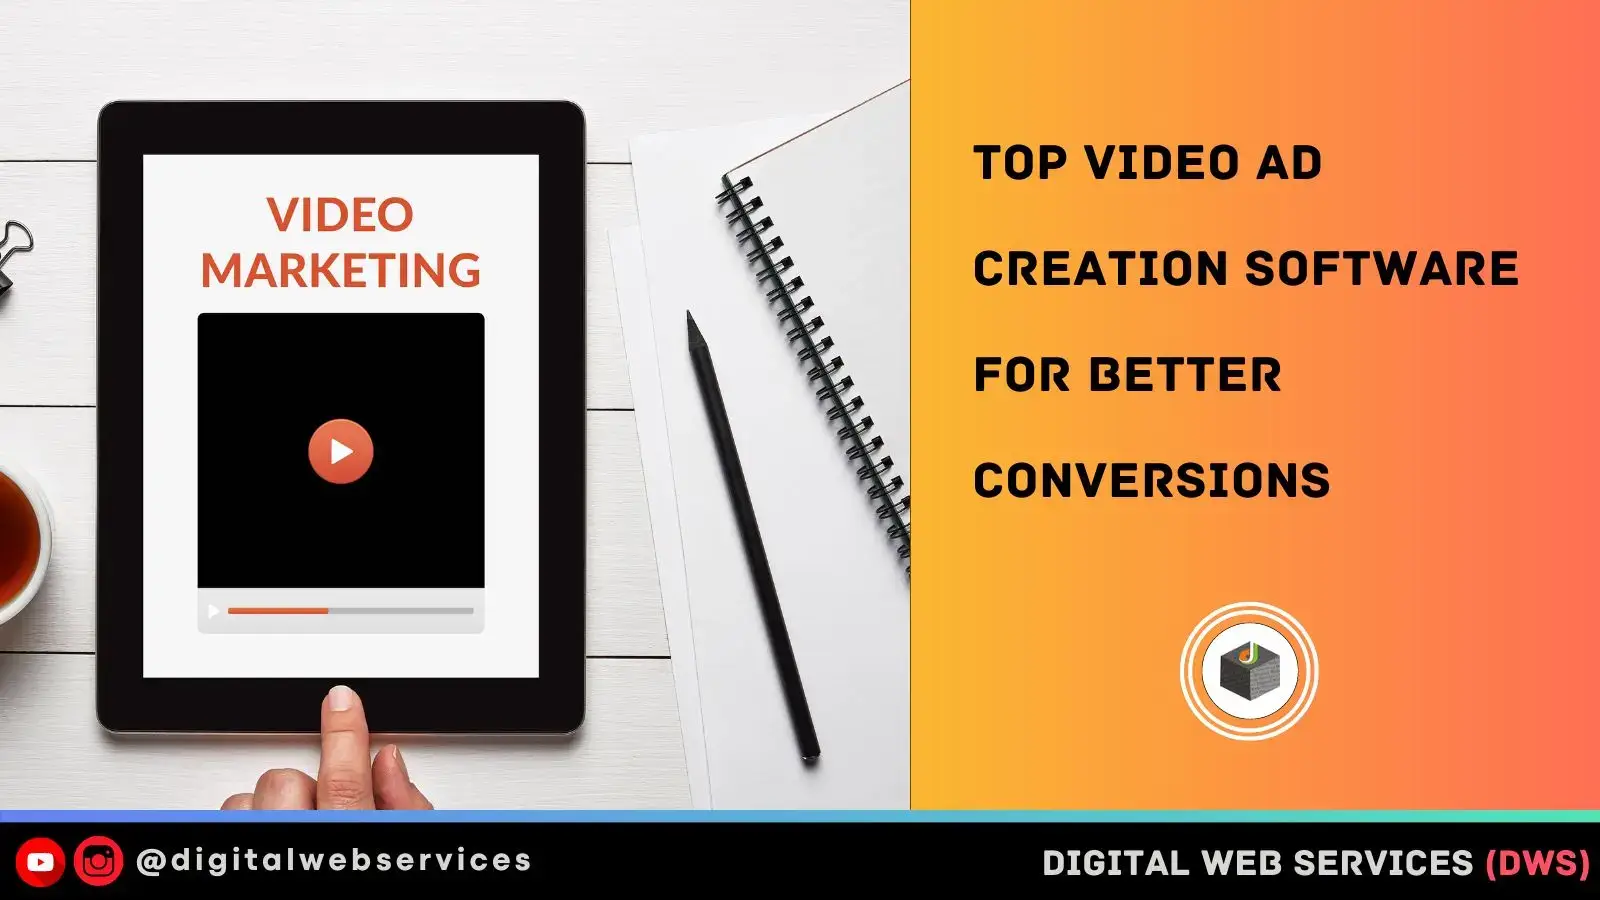 Top 15 Video Ad Creation Software for Better Conversions